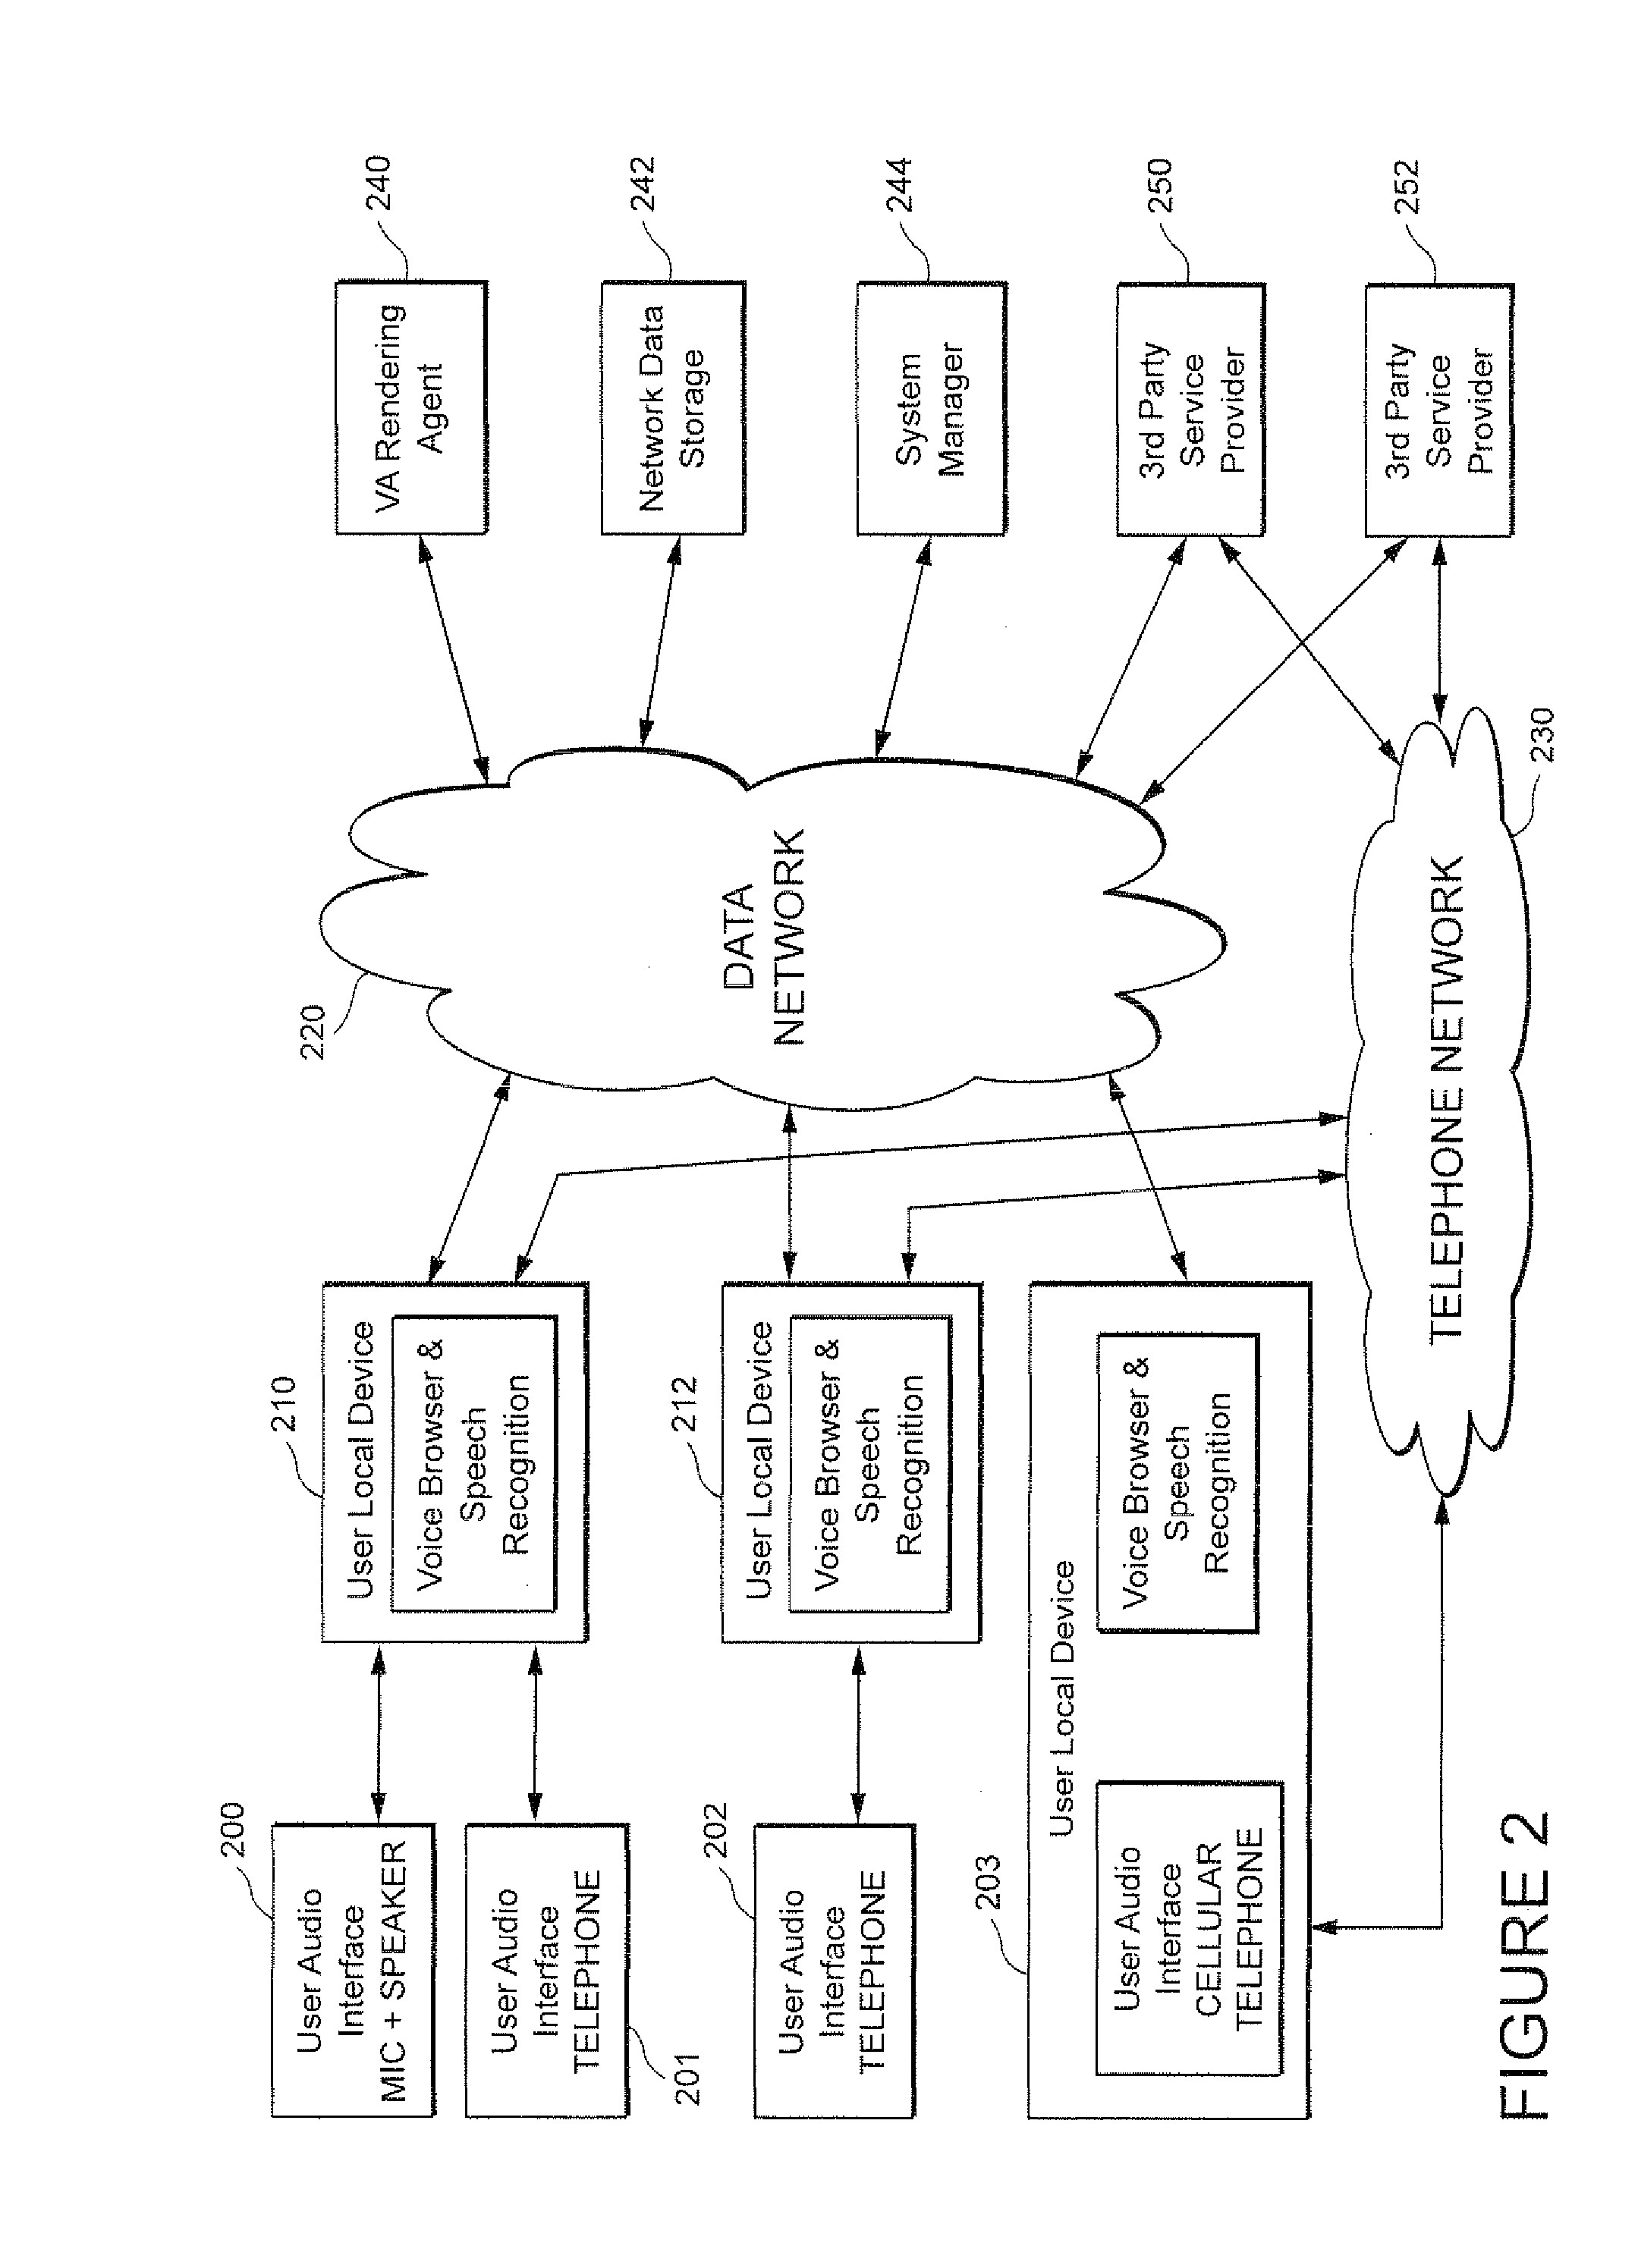 System and method for verifying the identity of a user by voiceprint analysis